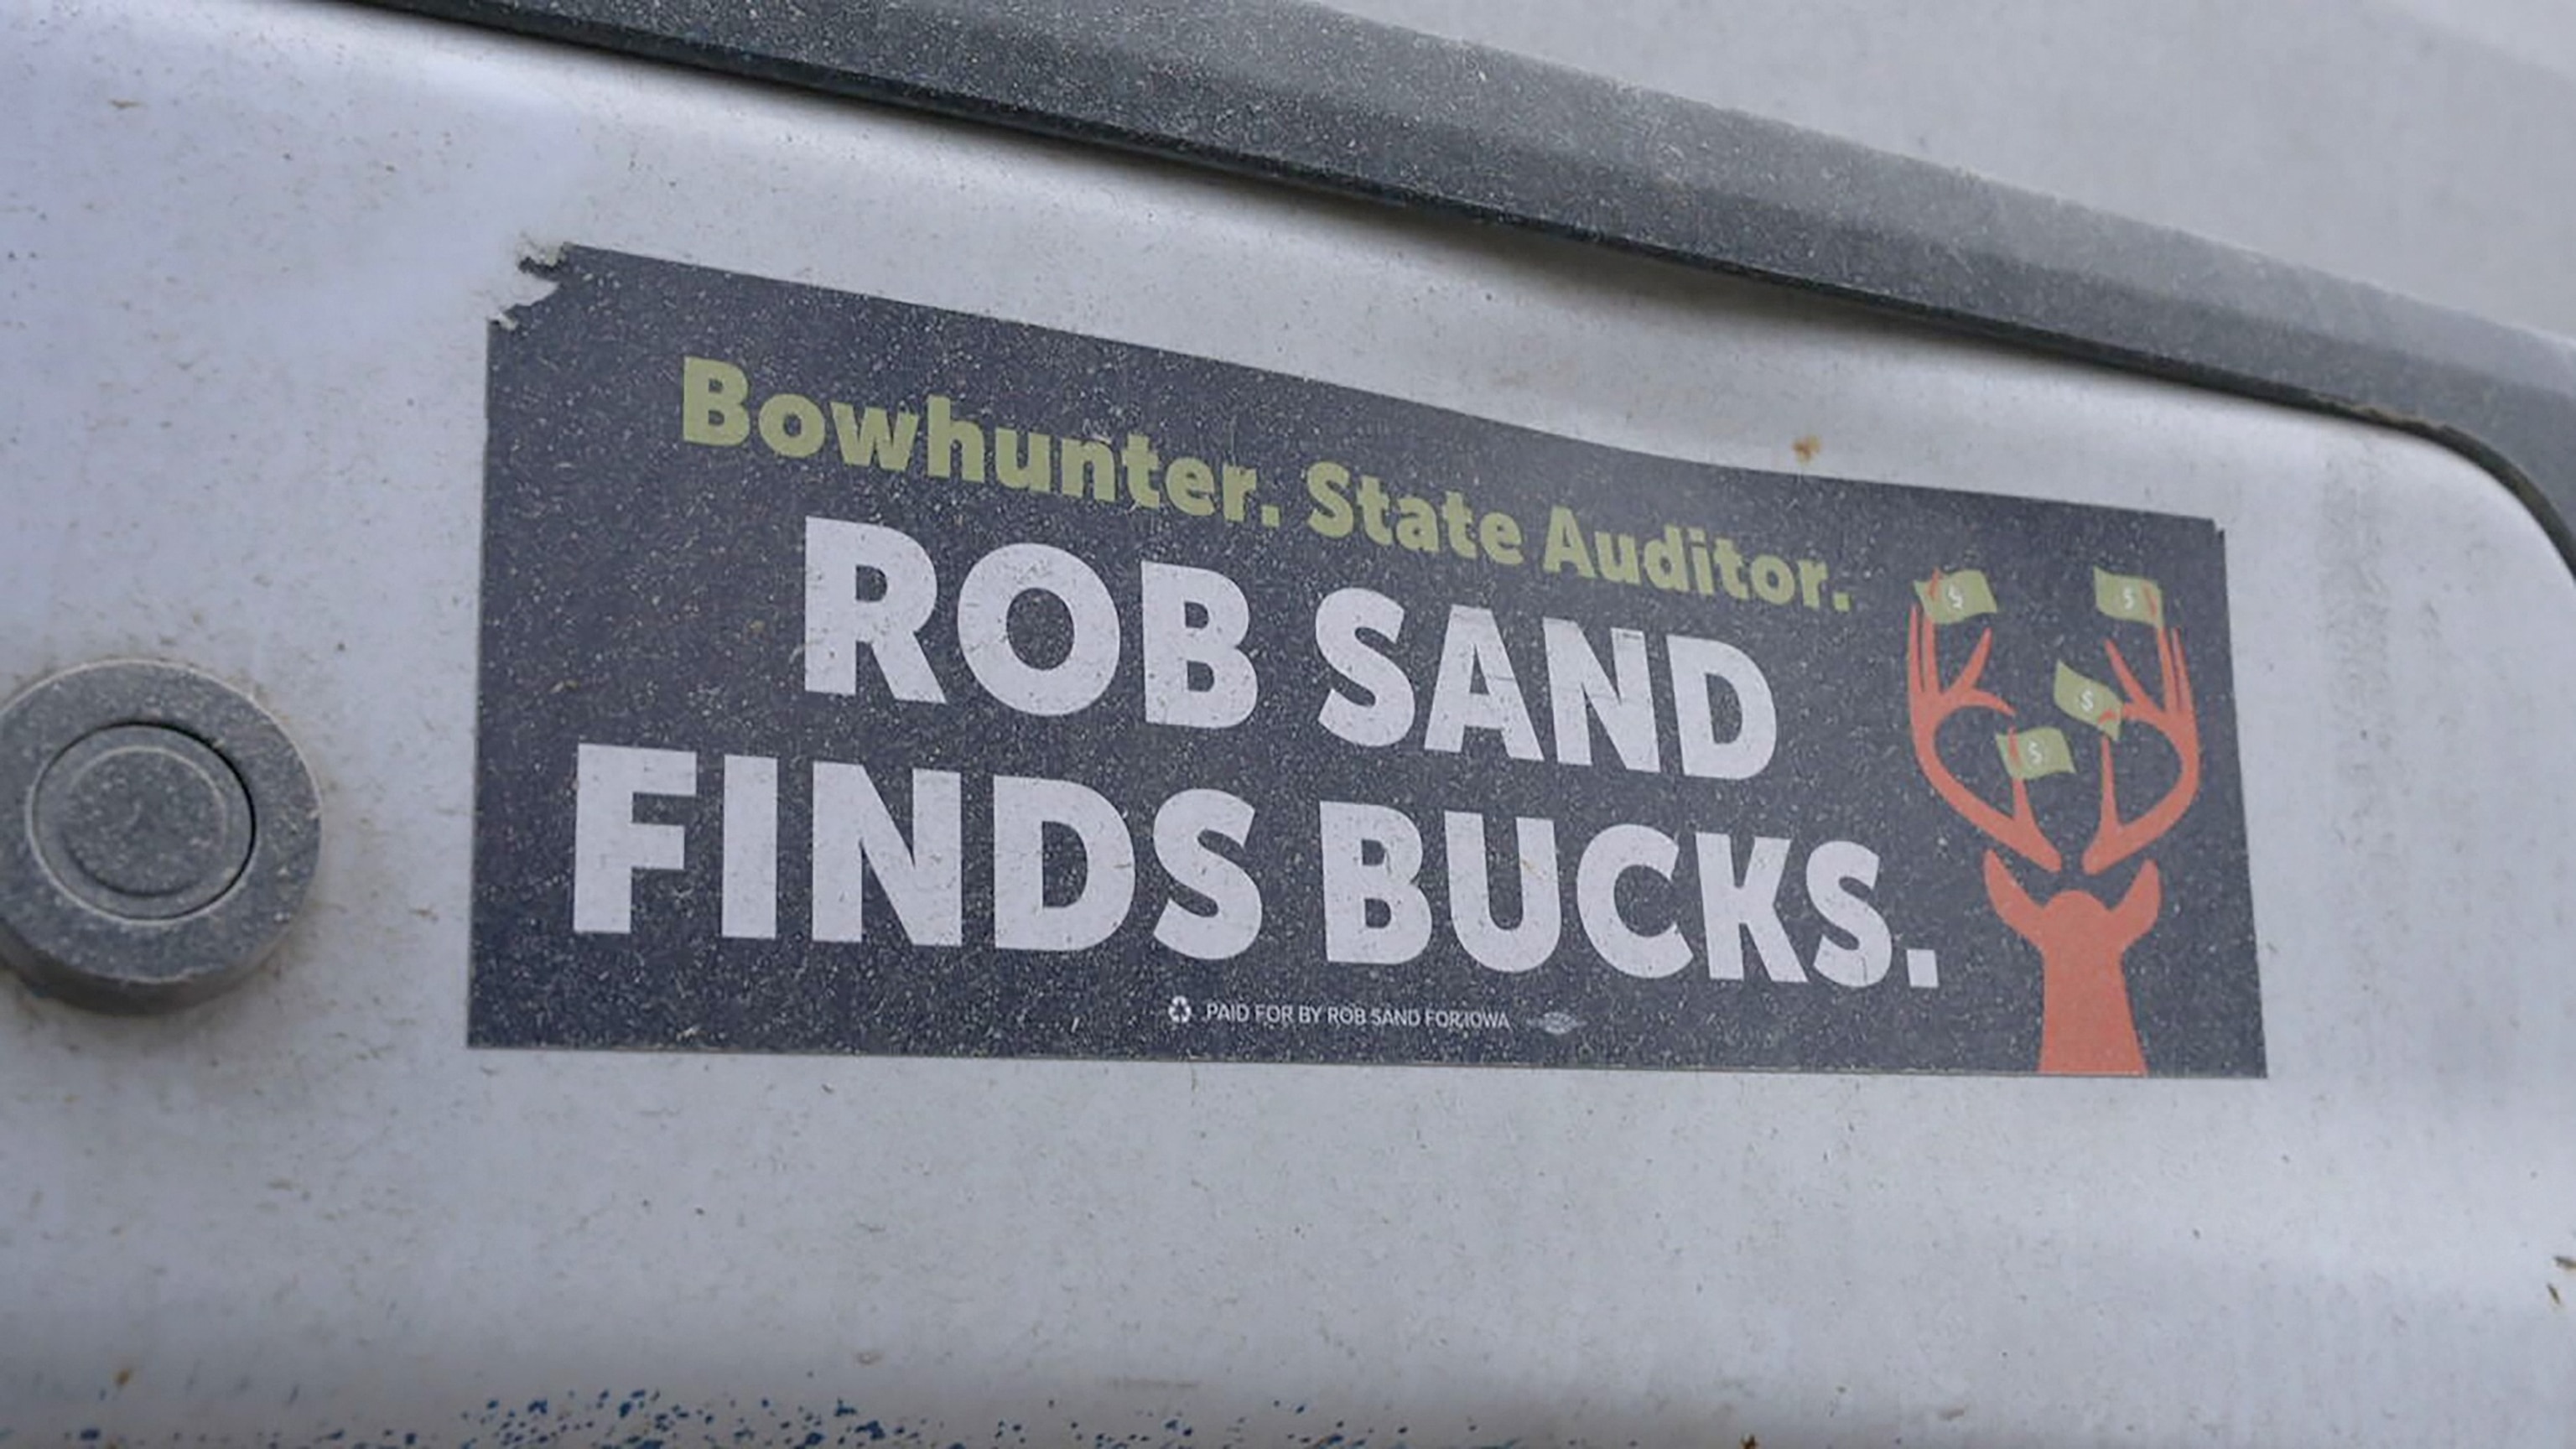 PHOTO: A bumper sticker on back of Rob Sand's pickup truck.